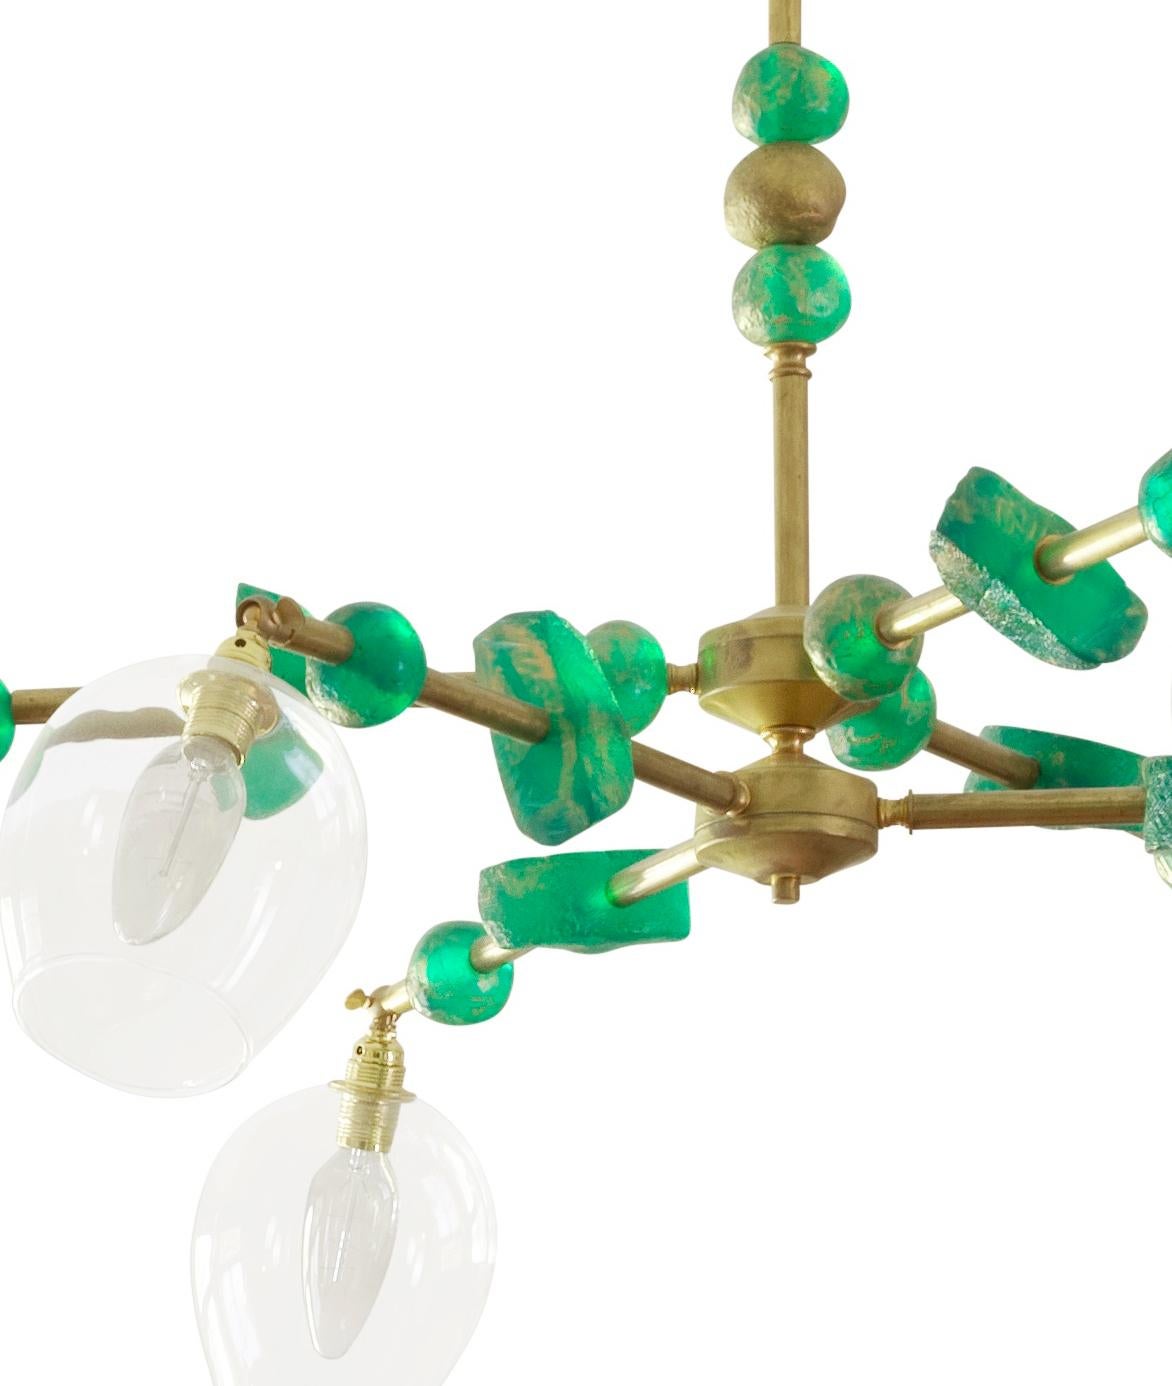 This contemporary two-tier, six-arm chandelier by Margit Wittig features sculptural components with organic and subtle textures, all cast and treated with multiple layers of patina in her London studio. The contrast of green translucent resin and